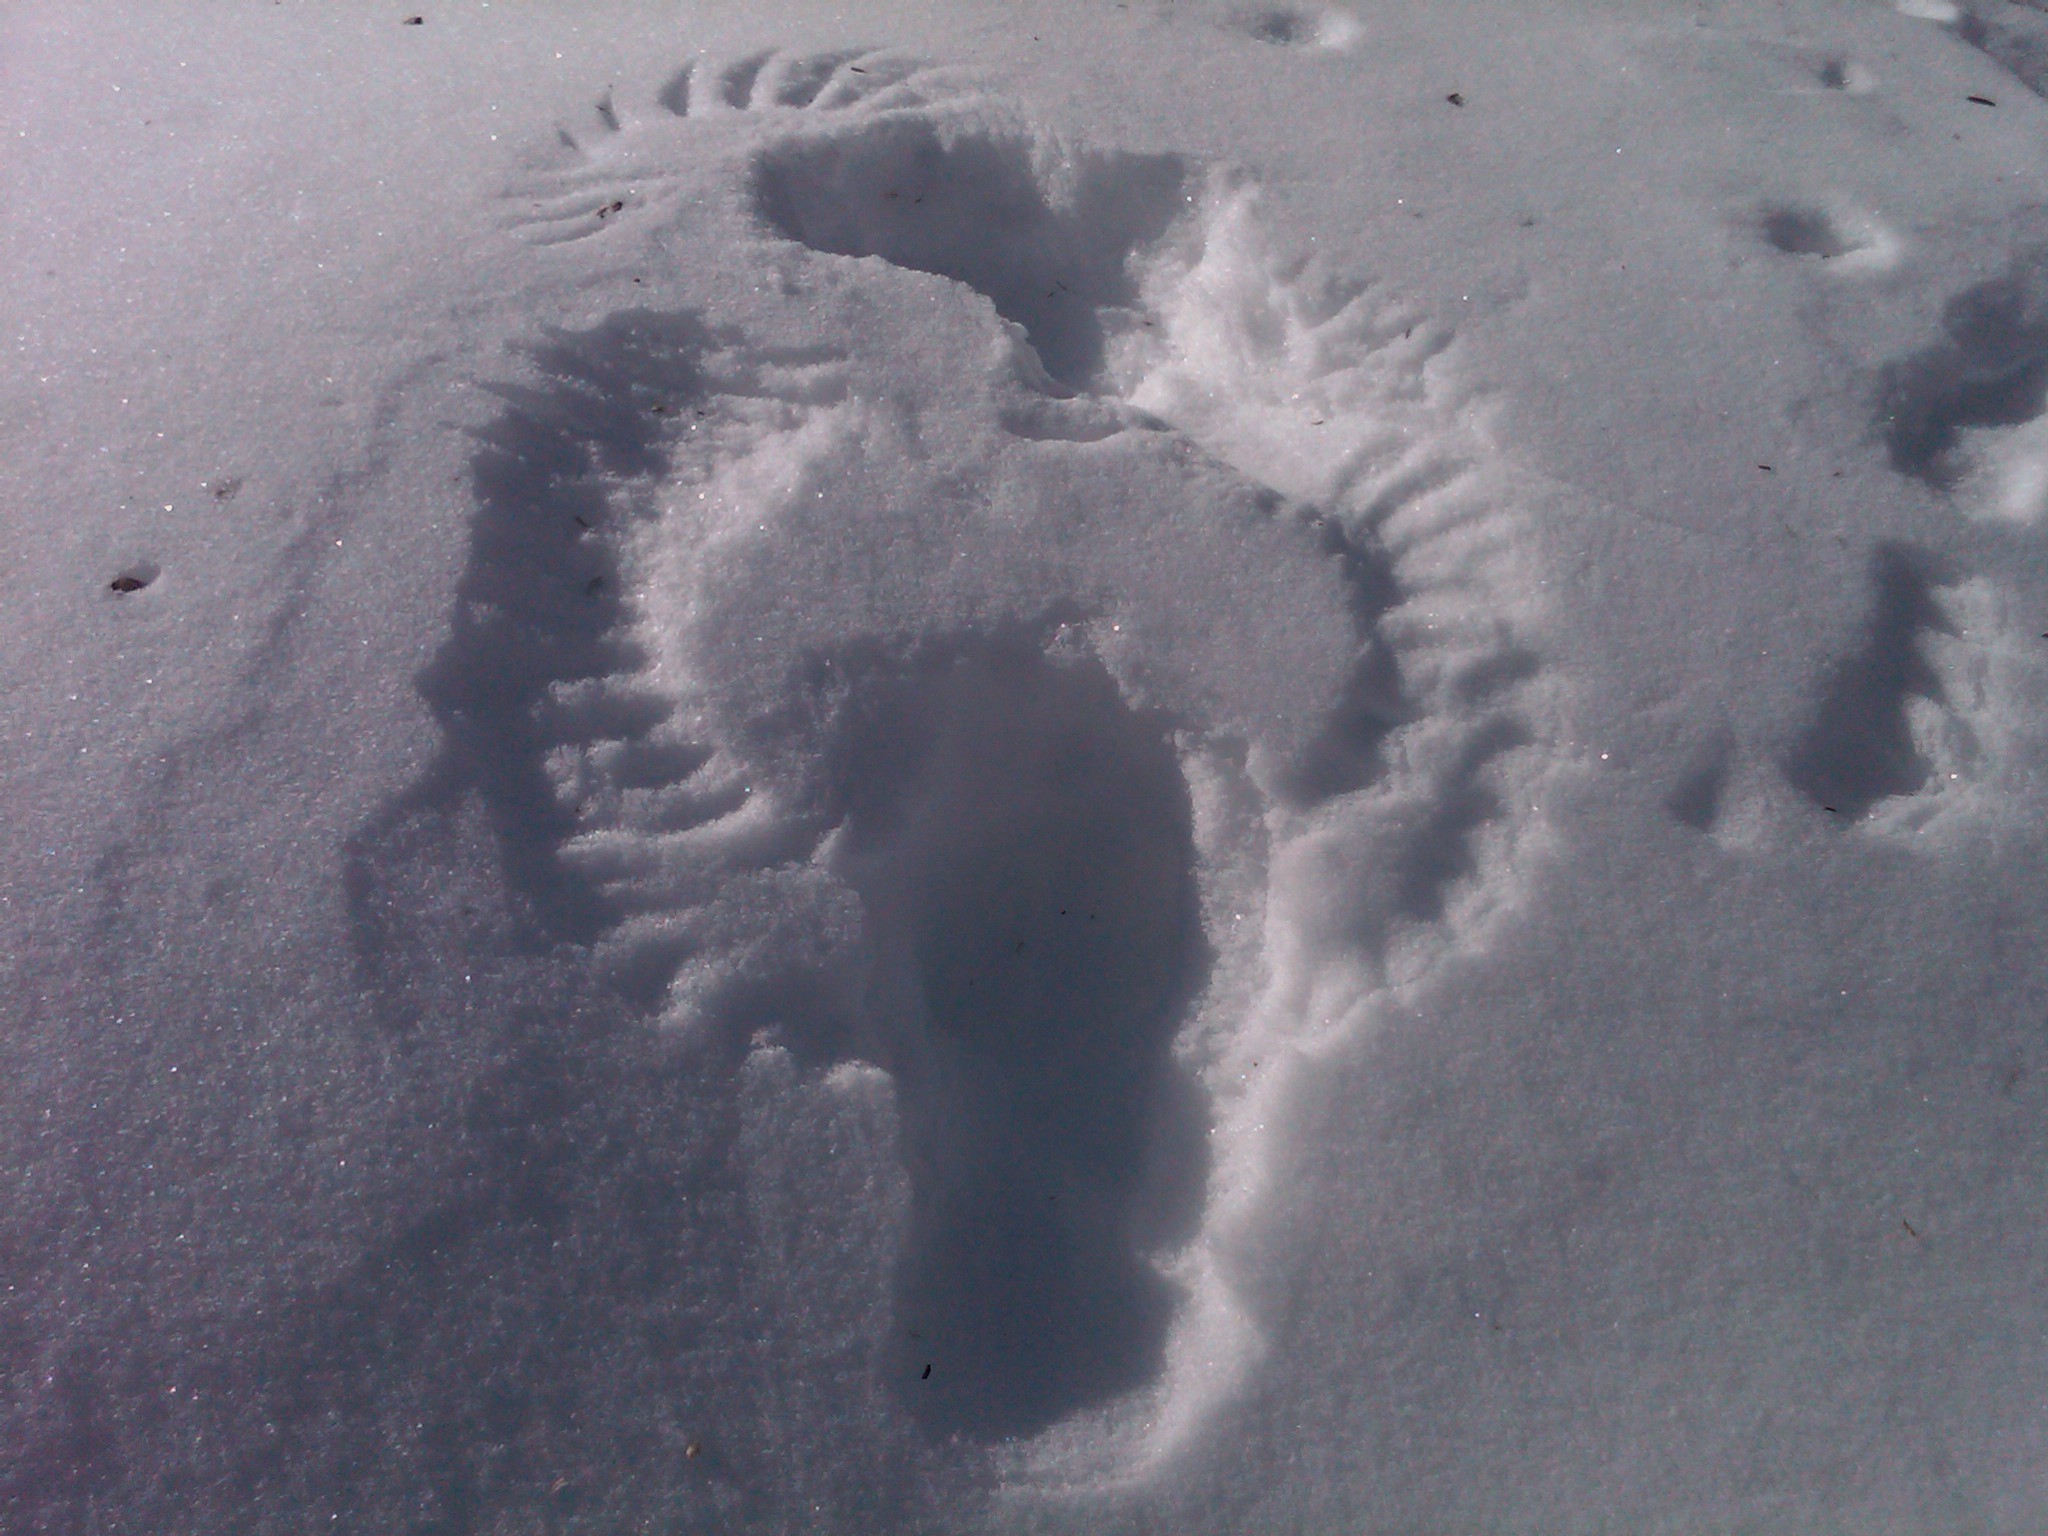 Eagle Imprint In Snow (user submitted)